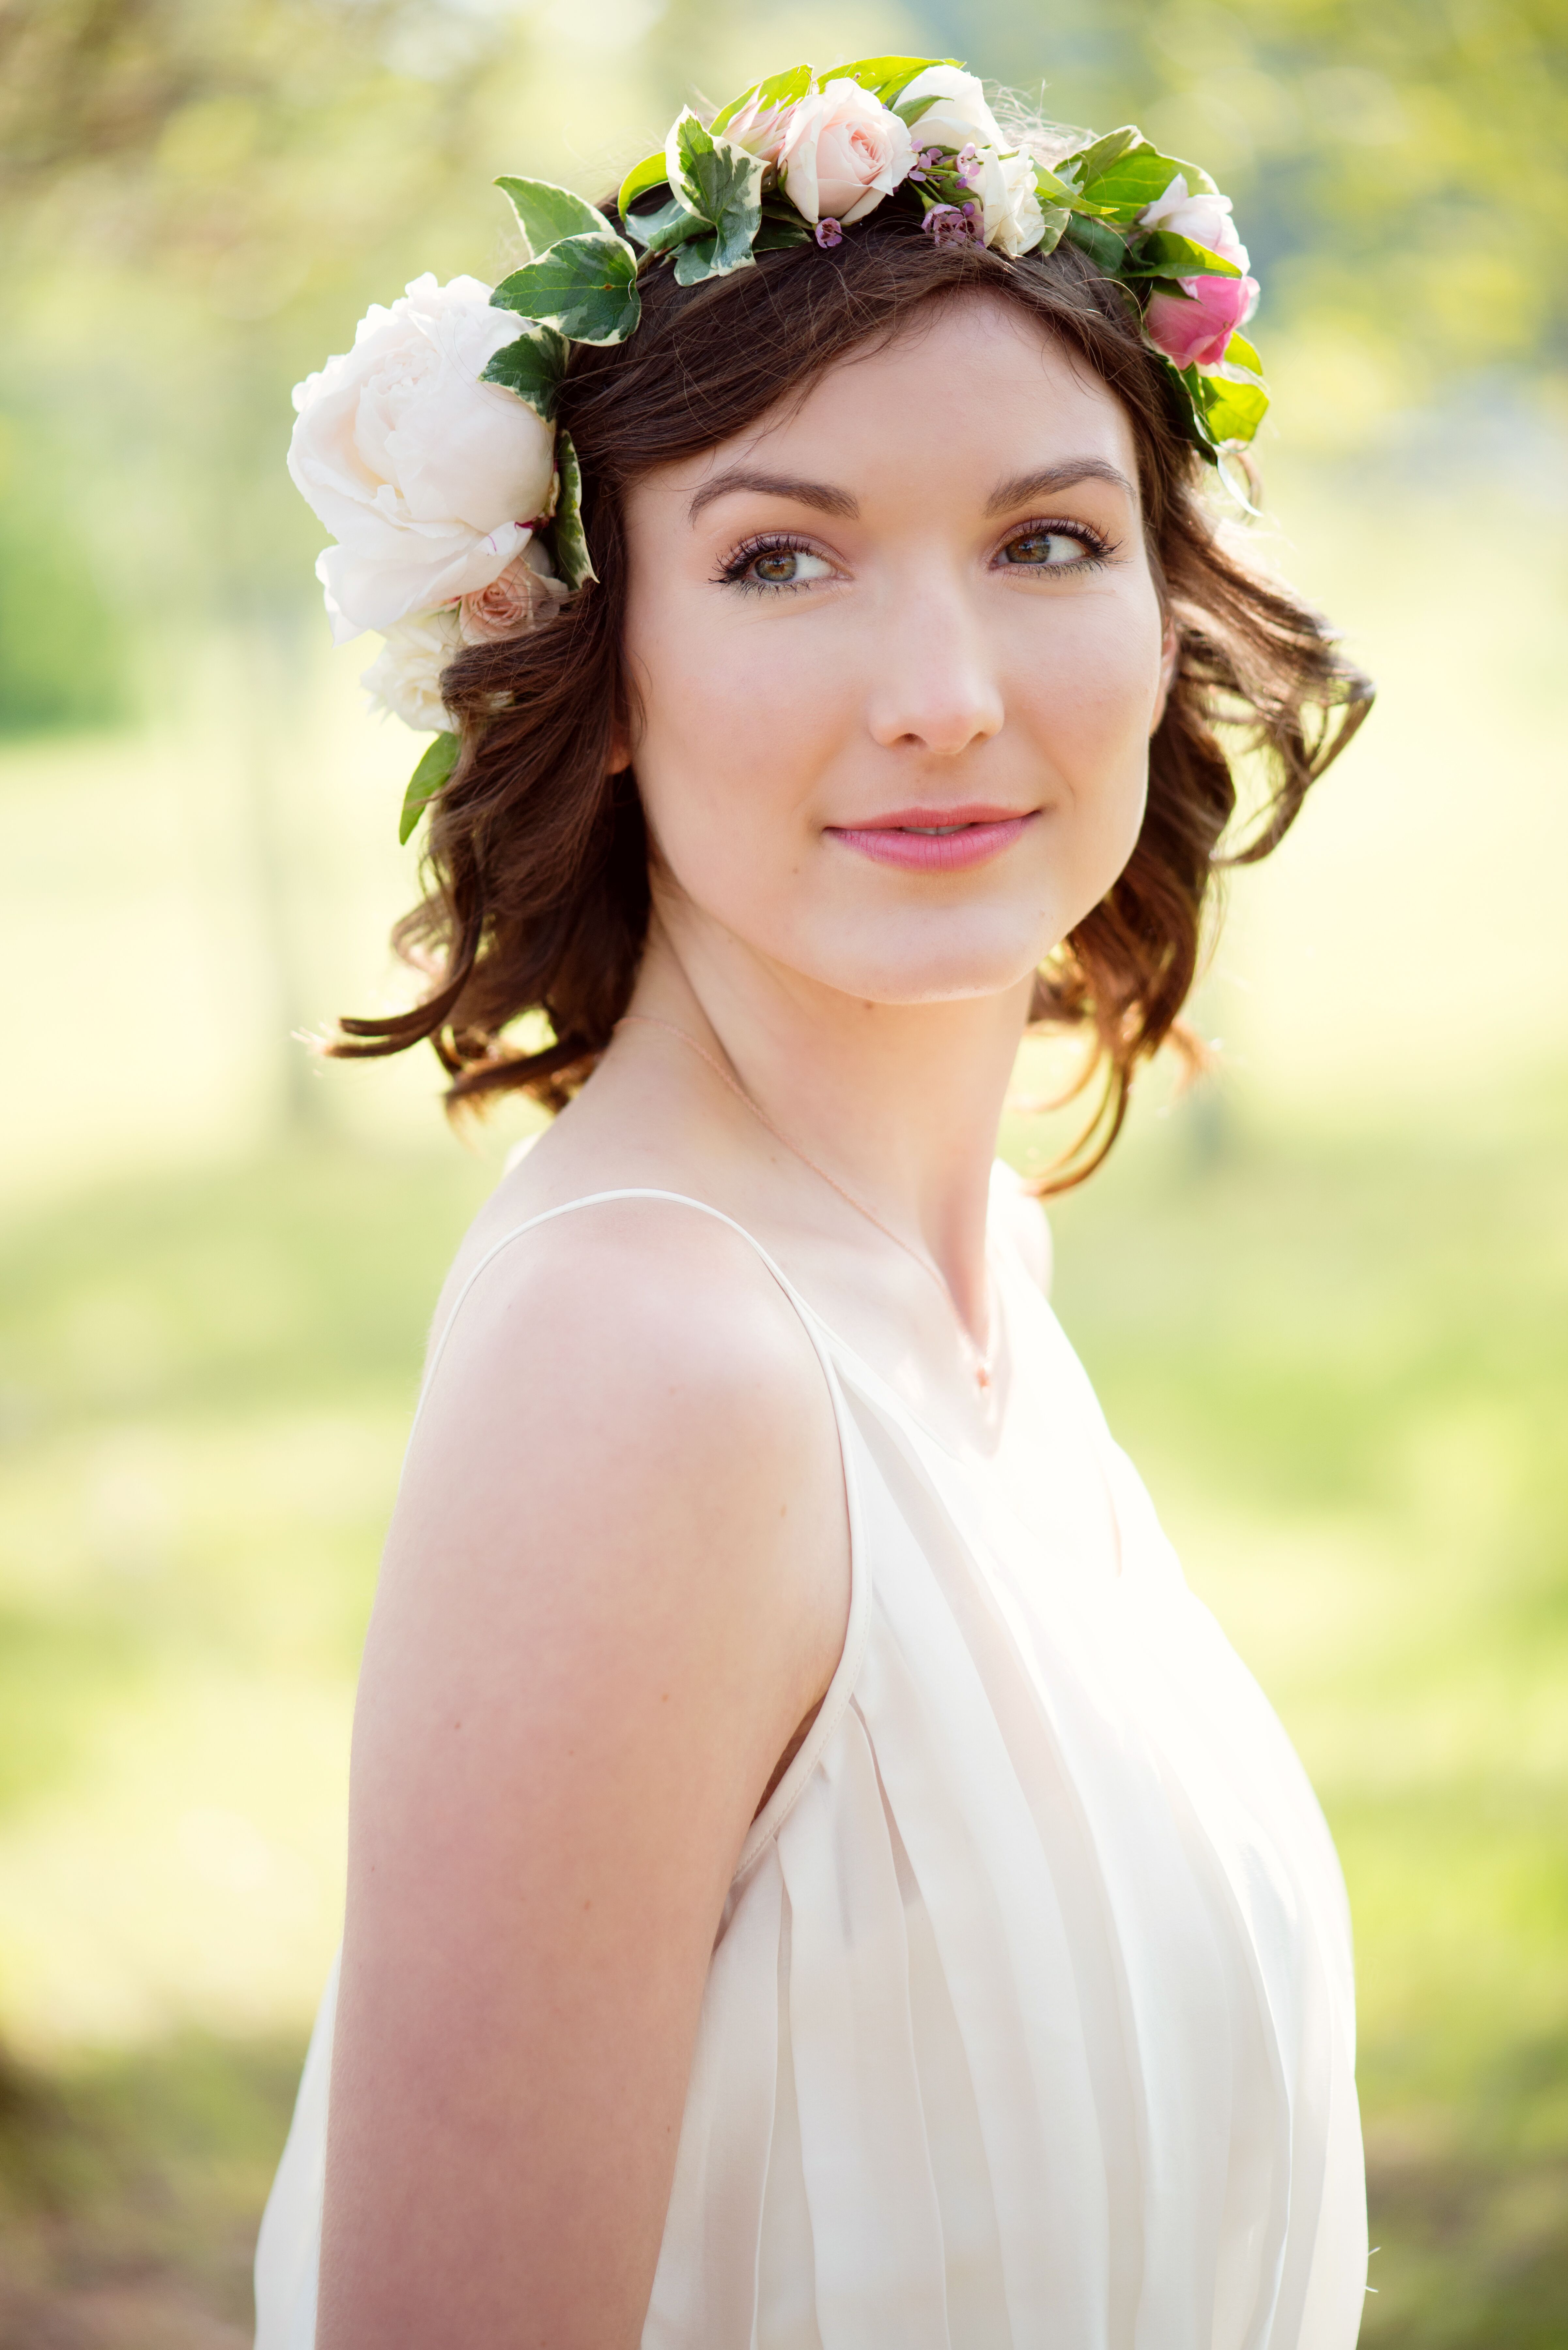 Short Curly Hairstyle with Bohemian Floral Crown